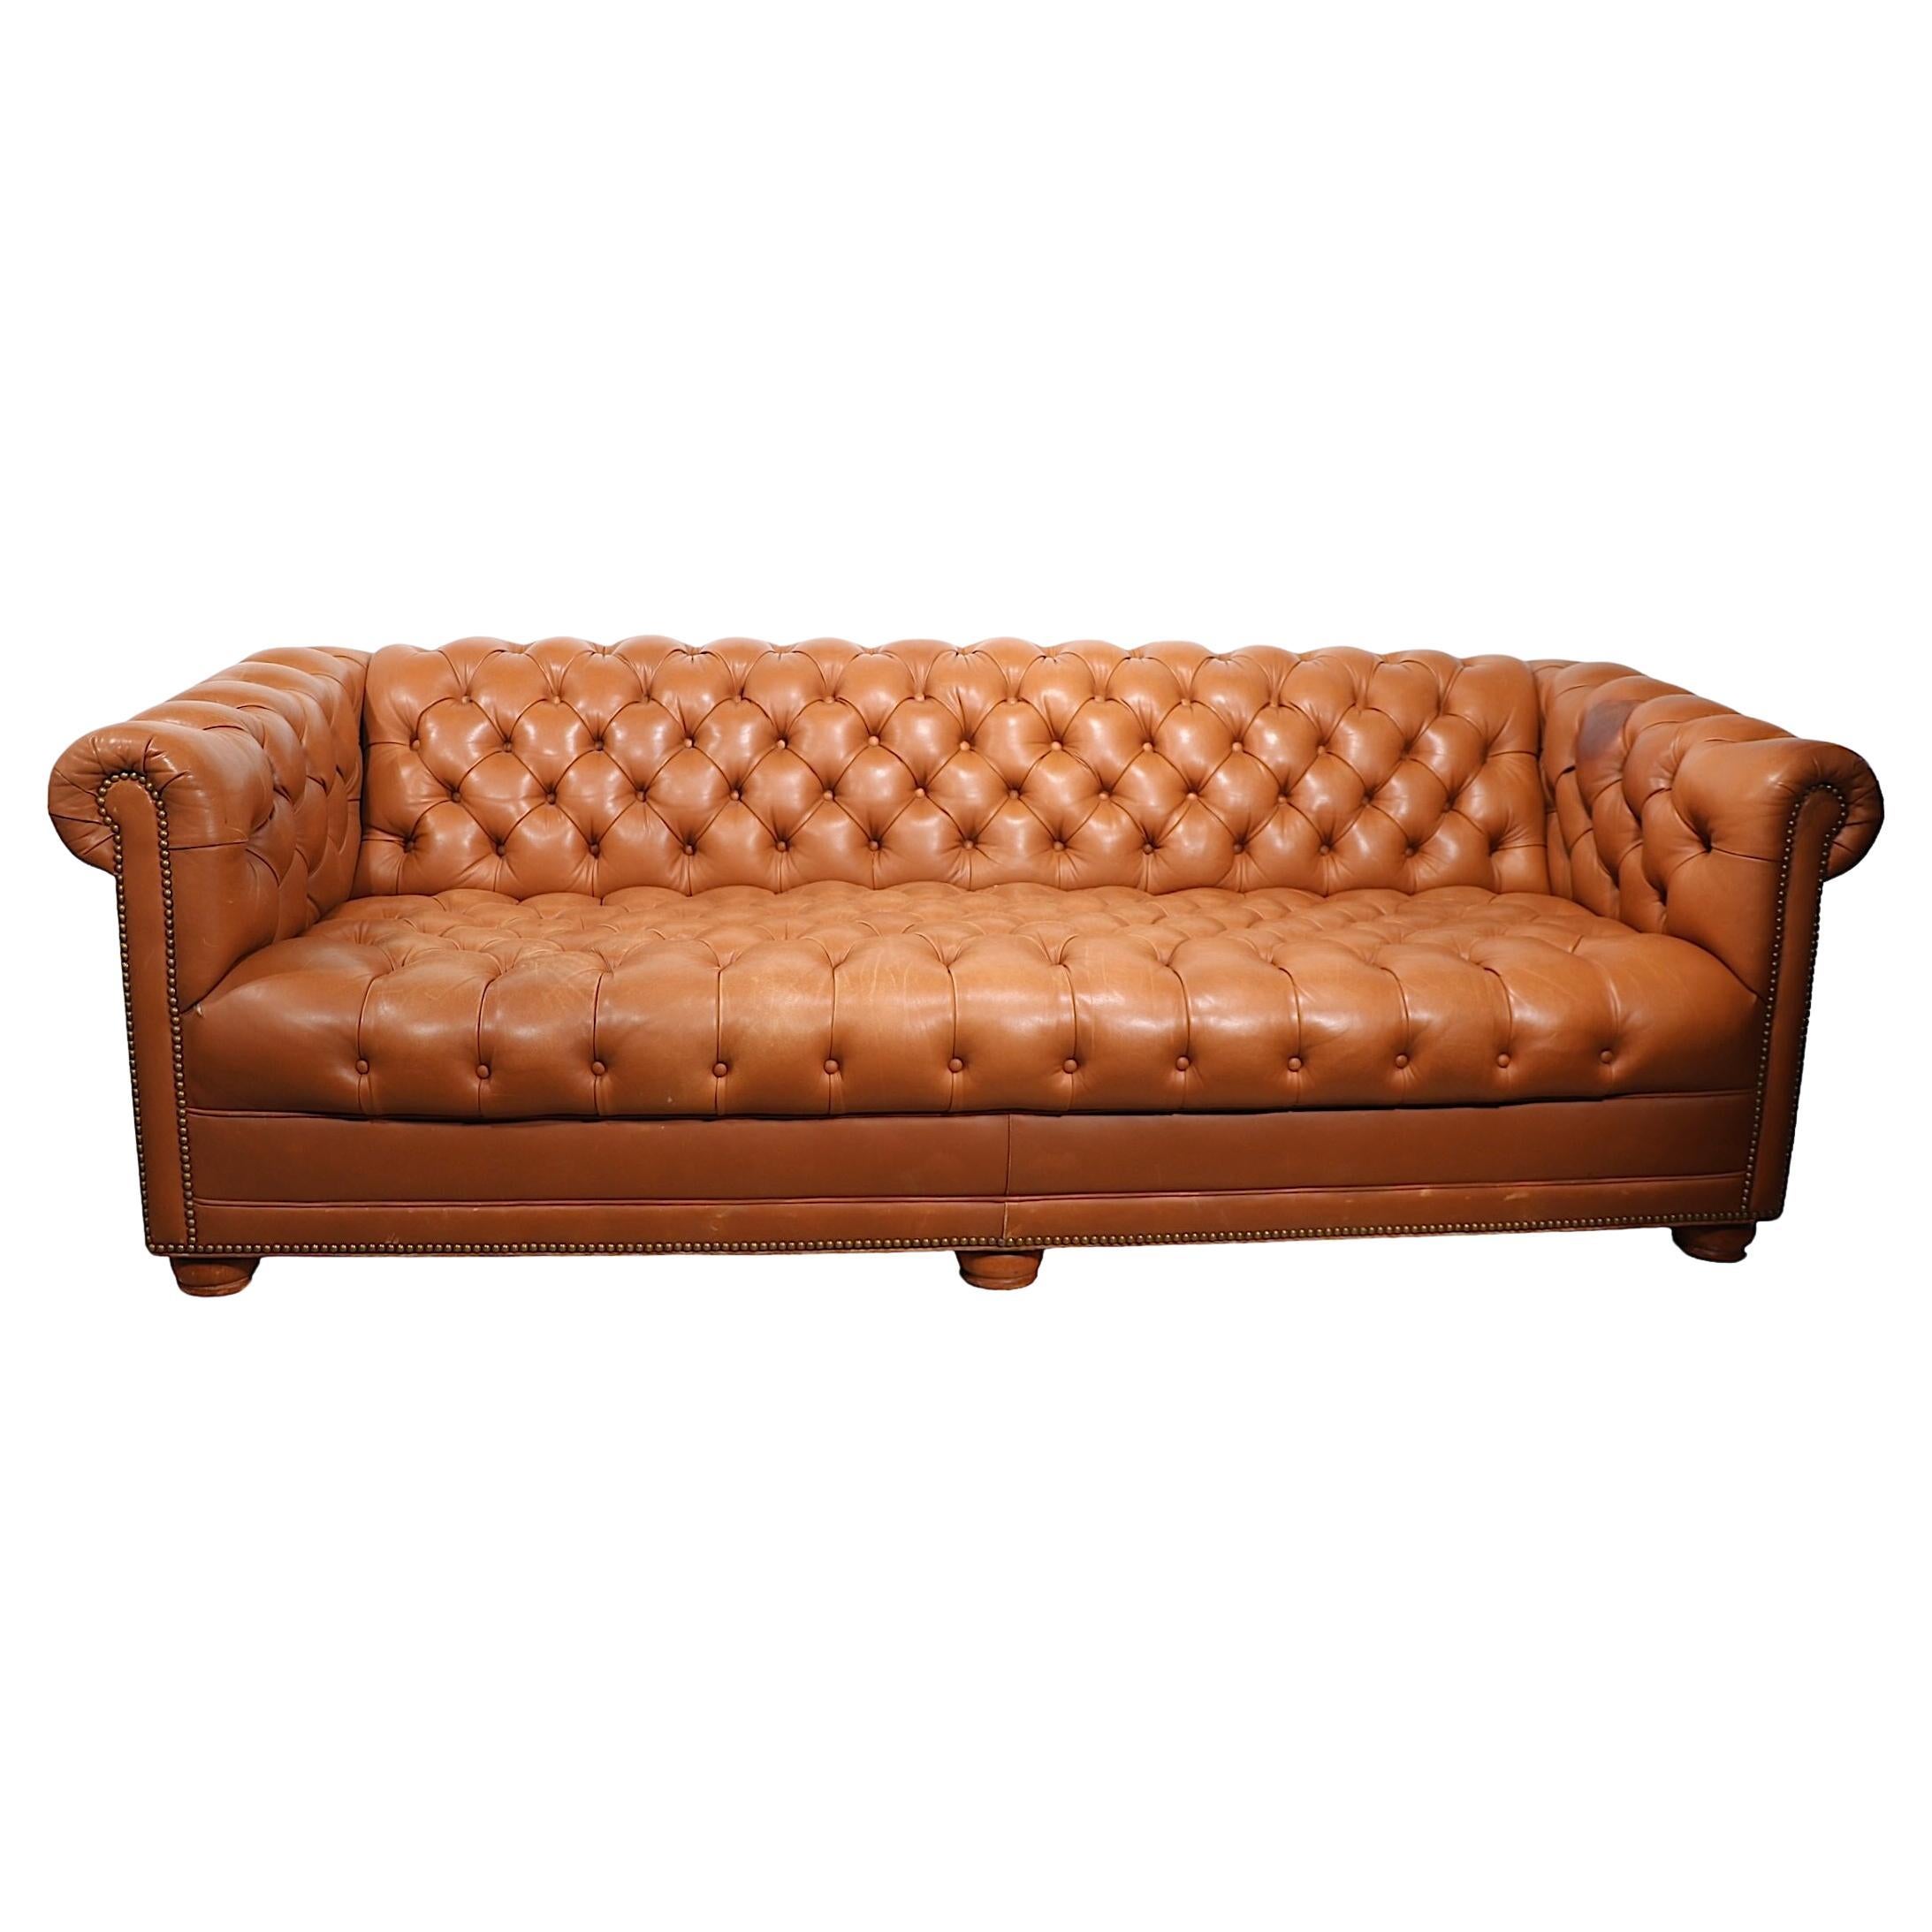 Incredible leather Chesterfield sofa by noted maker. Cabot Wrenn. The sofa feathers an allover tufted seat, back, and arms, with brass nailhead trim, on solid wood bun feet. Super chic, stylish and comfortable, this example does show some wear, and